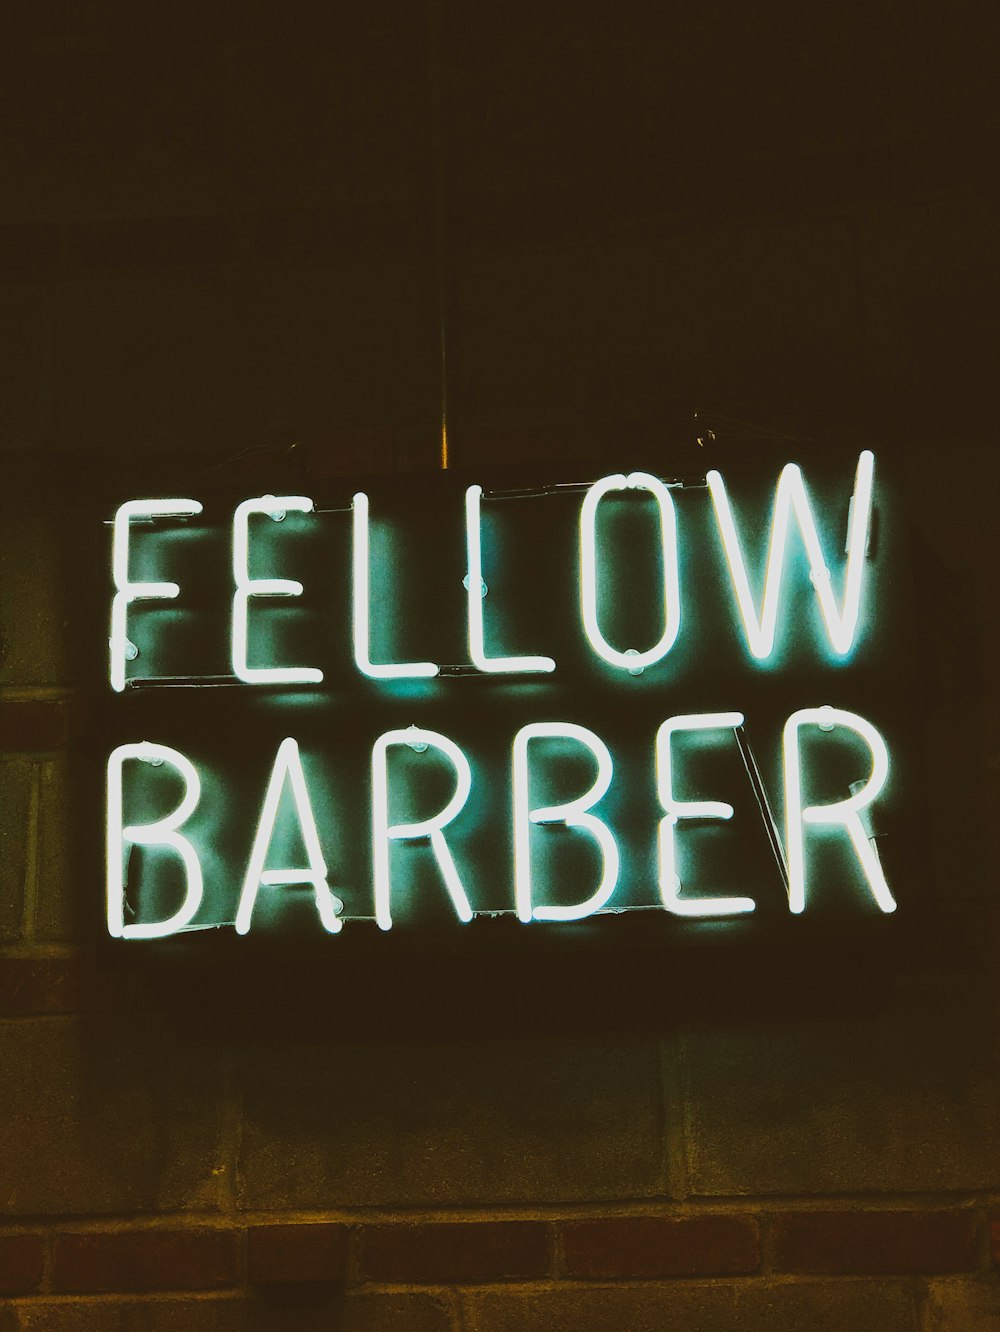 Fellow barber signage